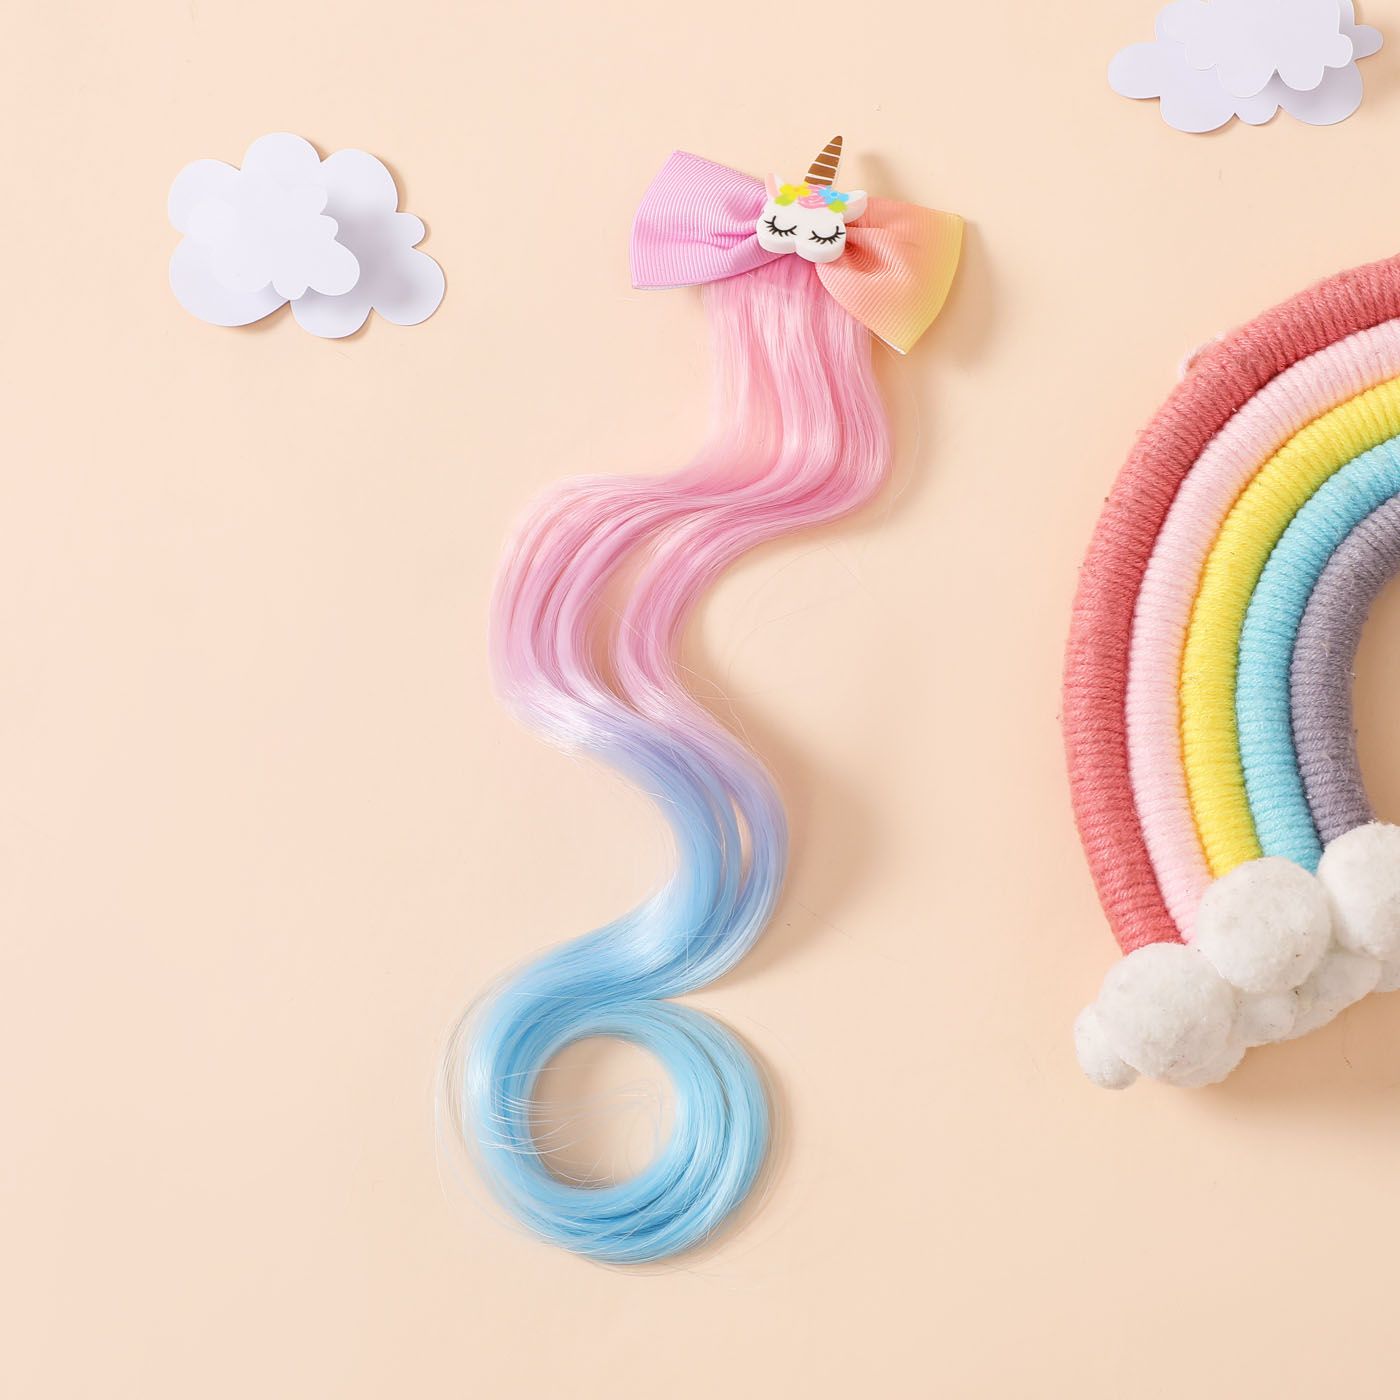 Unicorn Clip Hairpiece Hair Extension Wig Pieces For Girls